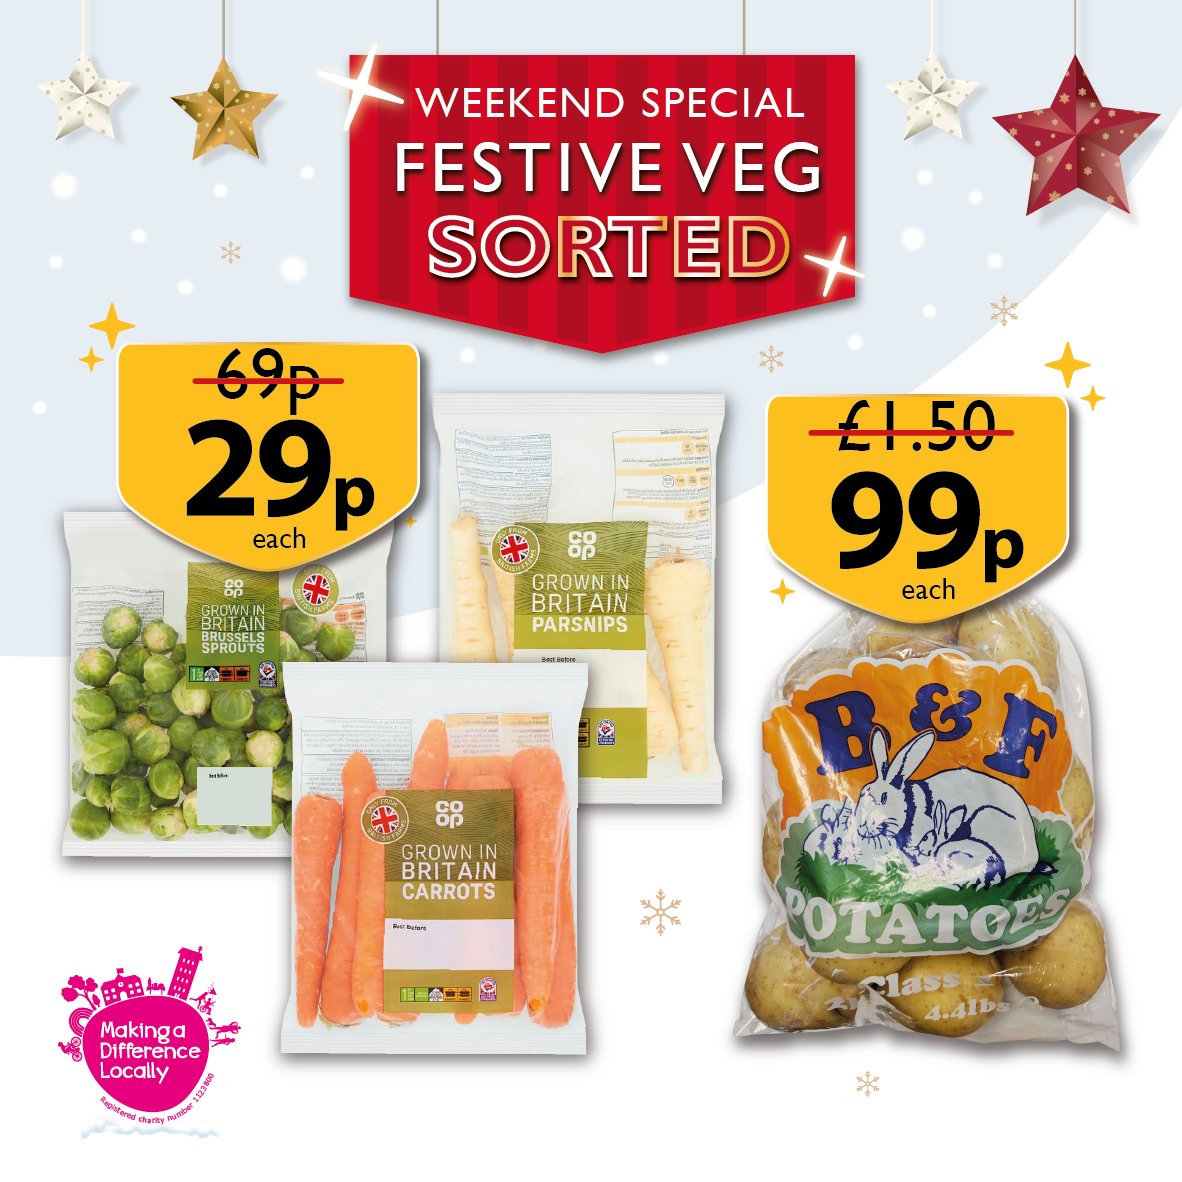 ⭐ Price slice now in store ⭐ Pick up Co-op Sprouts 450g, Co-op Carrots 1kg and Co-op Parsnips 500g - Was 69p, now 29p each! Grab a bag of B&F White Potatoes 2kg too - Was £1.50, now just 99p each! Available at all Proudfoot stores for a limited time only while stocks last.